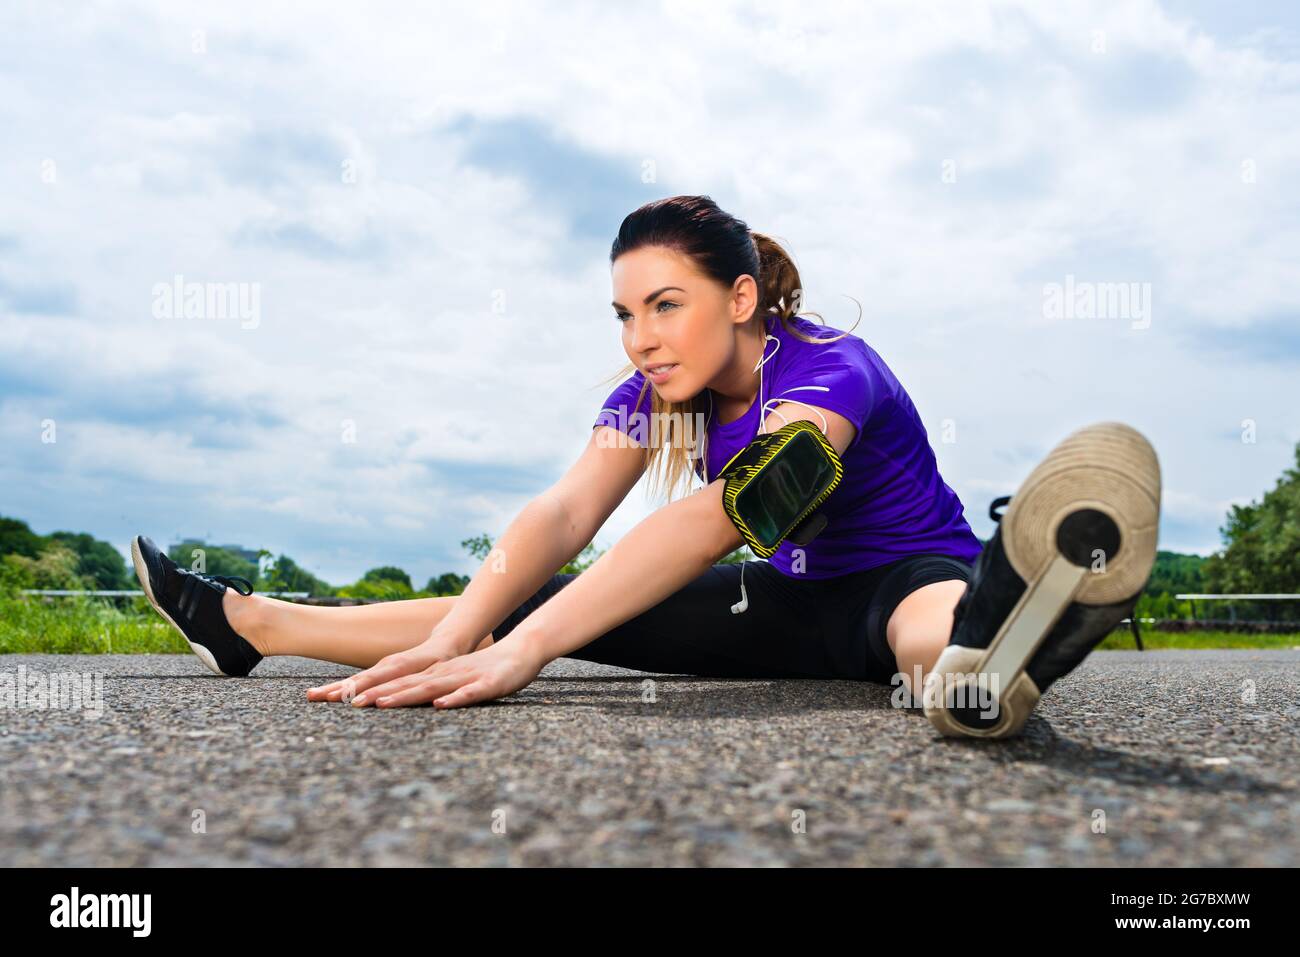 Urban sports - young woman is doing warming up before running in the greenfield on a summer day Stock Photo